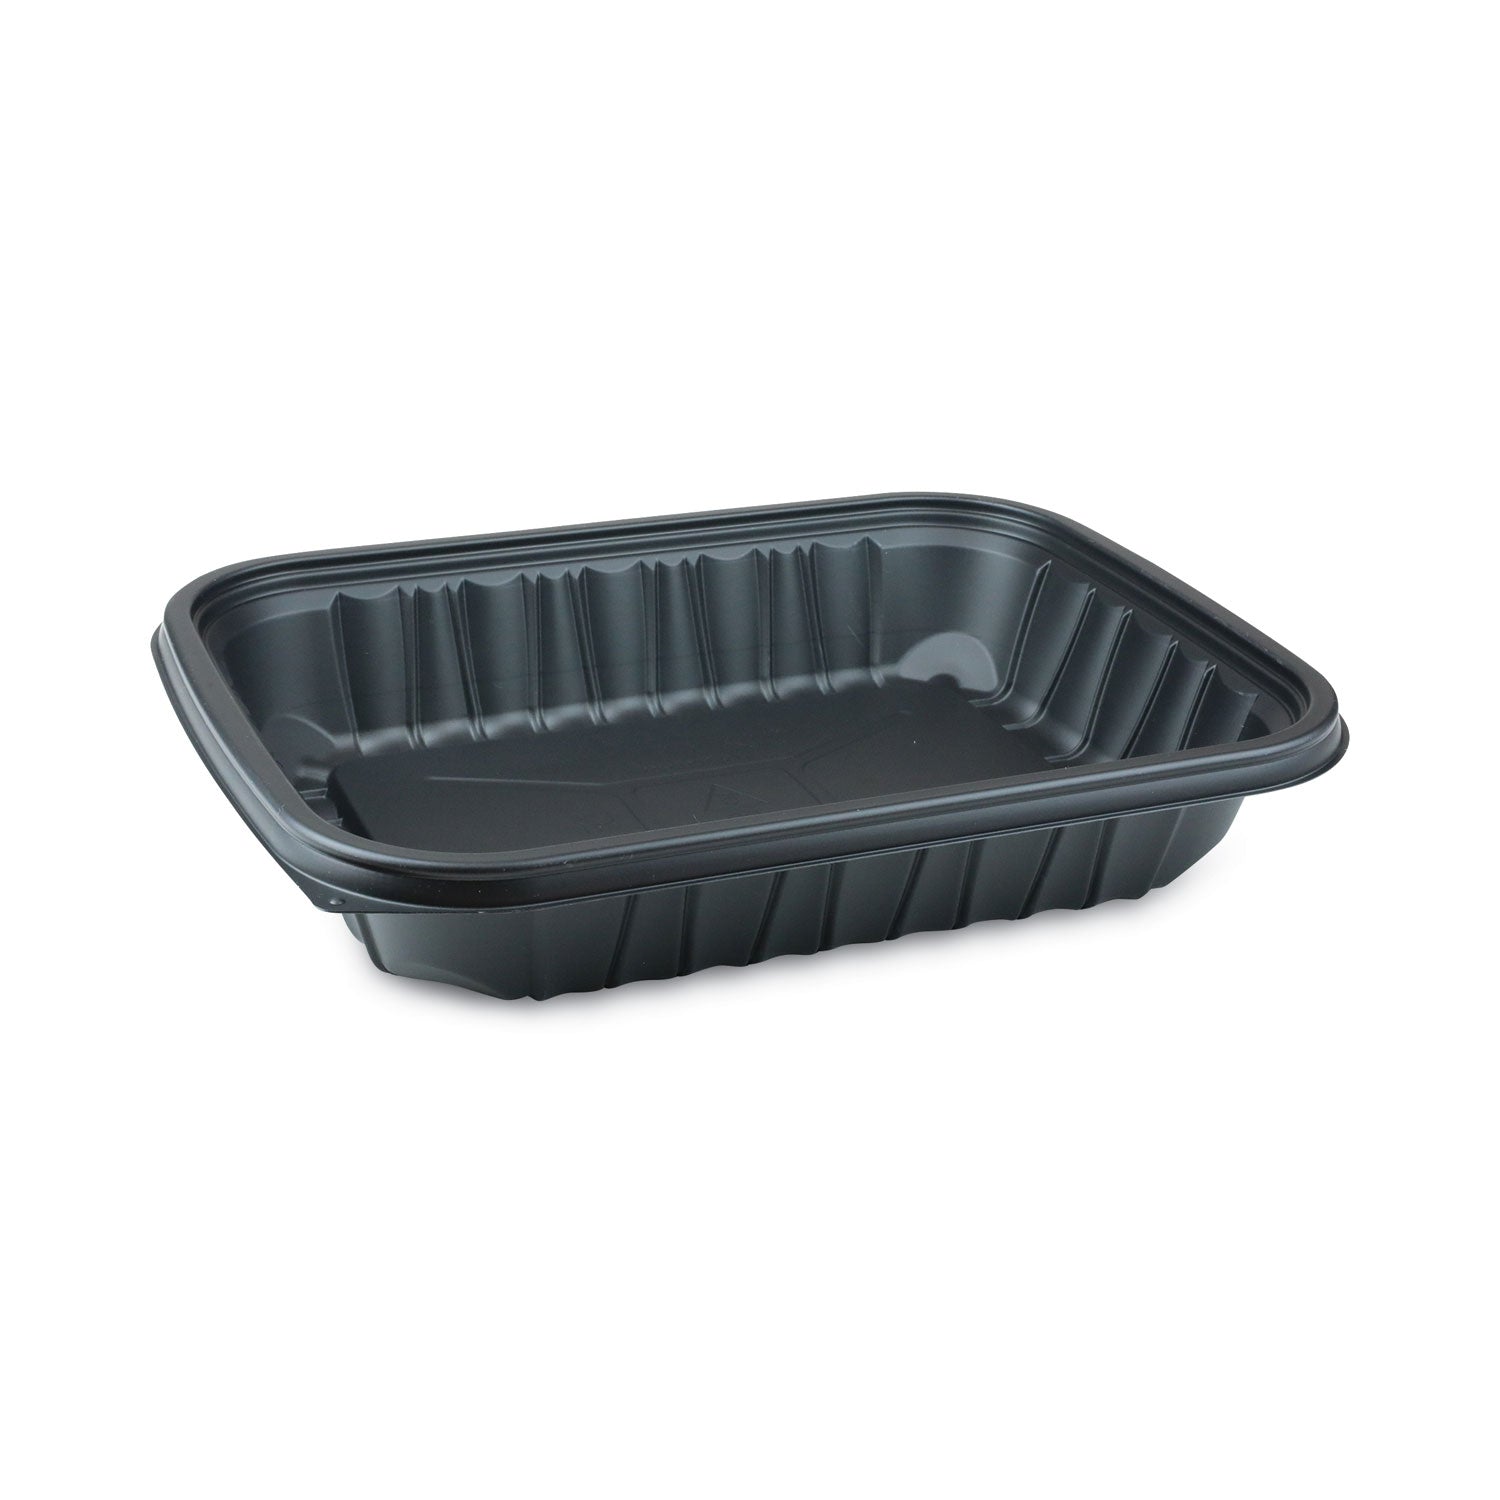 earthchoice-entree2go-takeout-container-64-oz-1175-x-875-x-213-black-plastic-200-carton_pctycnb12x96400 - 1